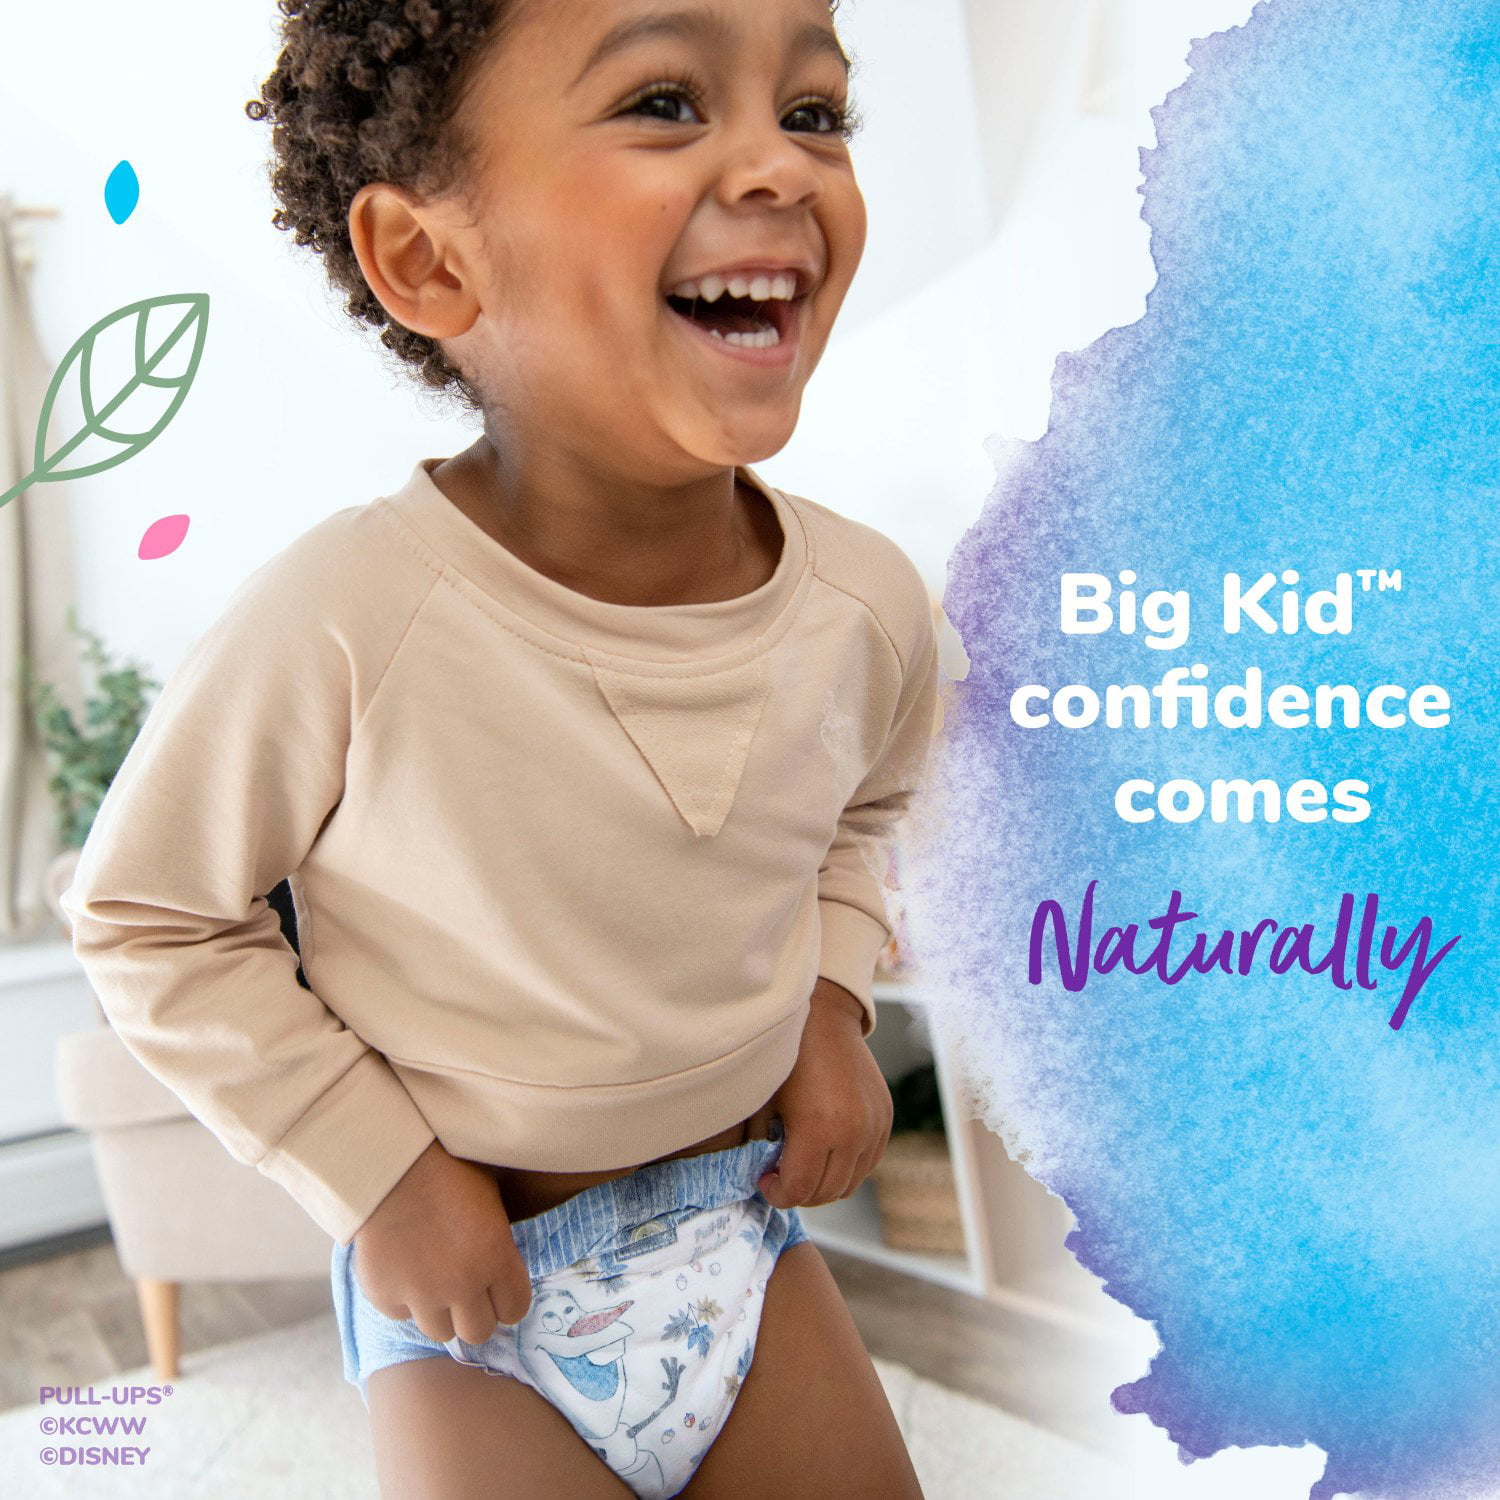 Save on Huggies Pull-Ups New Leaf 4T-5T Girl Training Underwear Frozen  38-50lbs Order Online Delivery